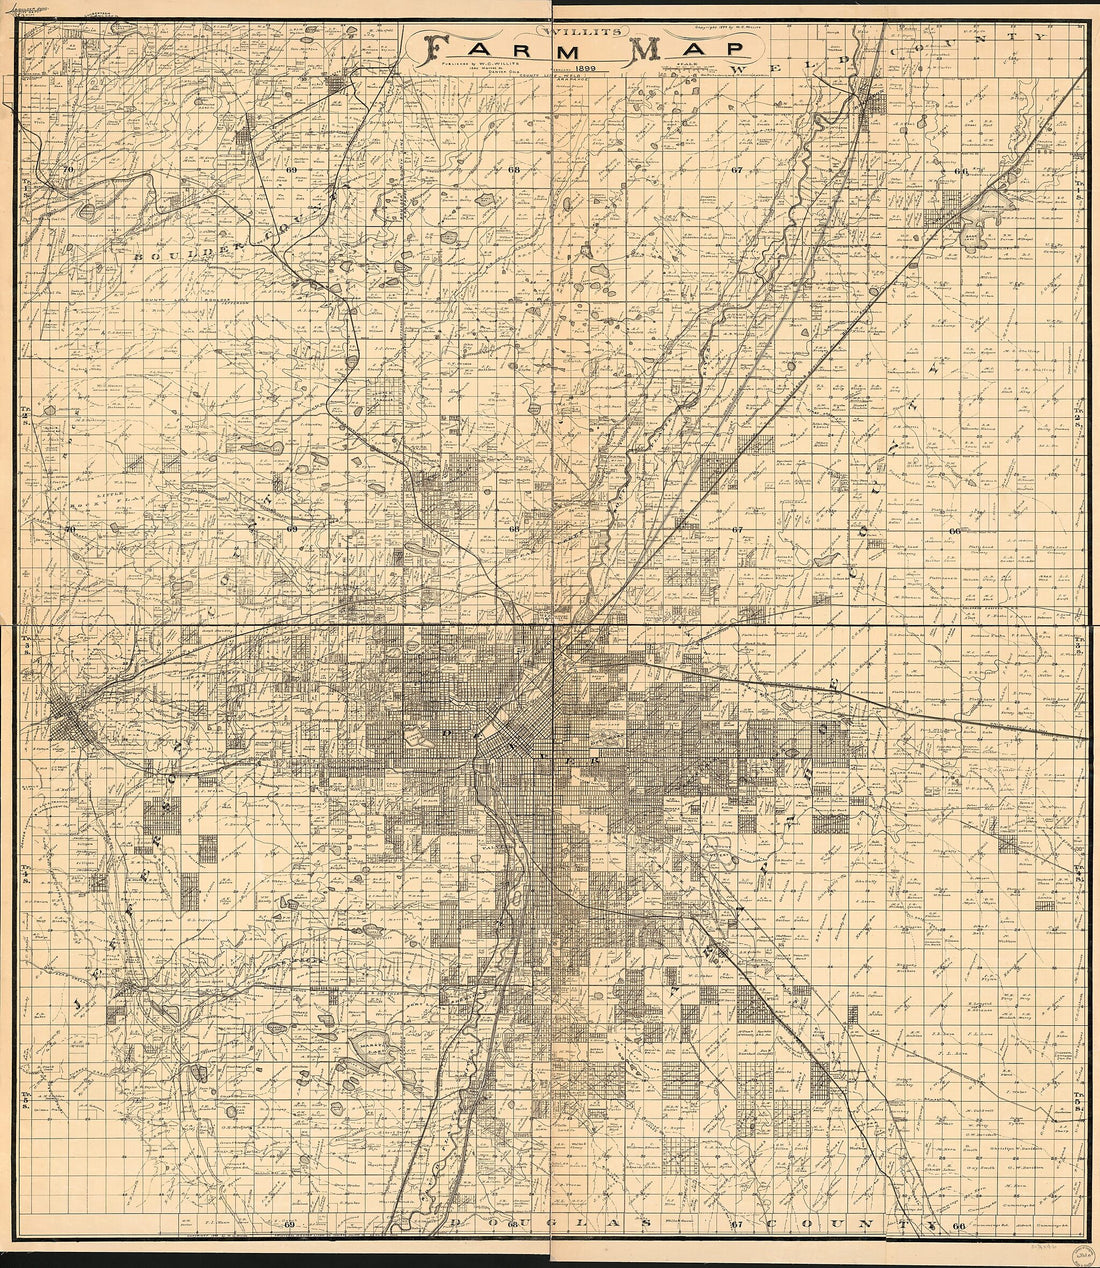 This old map of Willits Farm Map from 1899 was created by W. C. (Warren C.) Willits in 1899